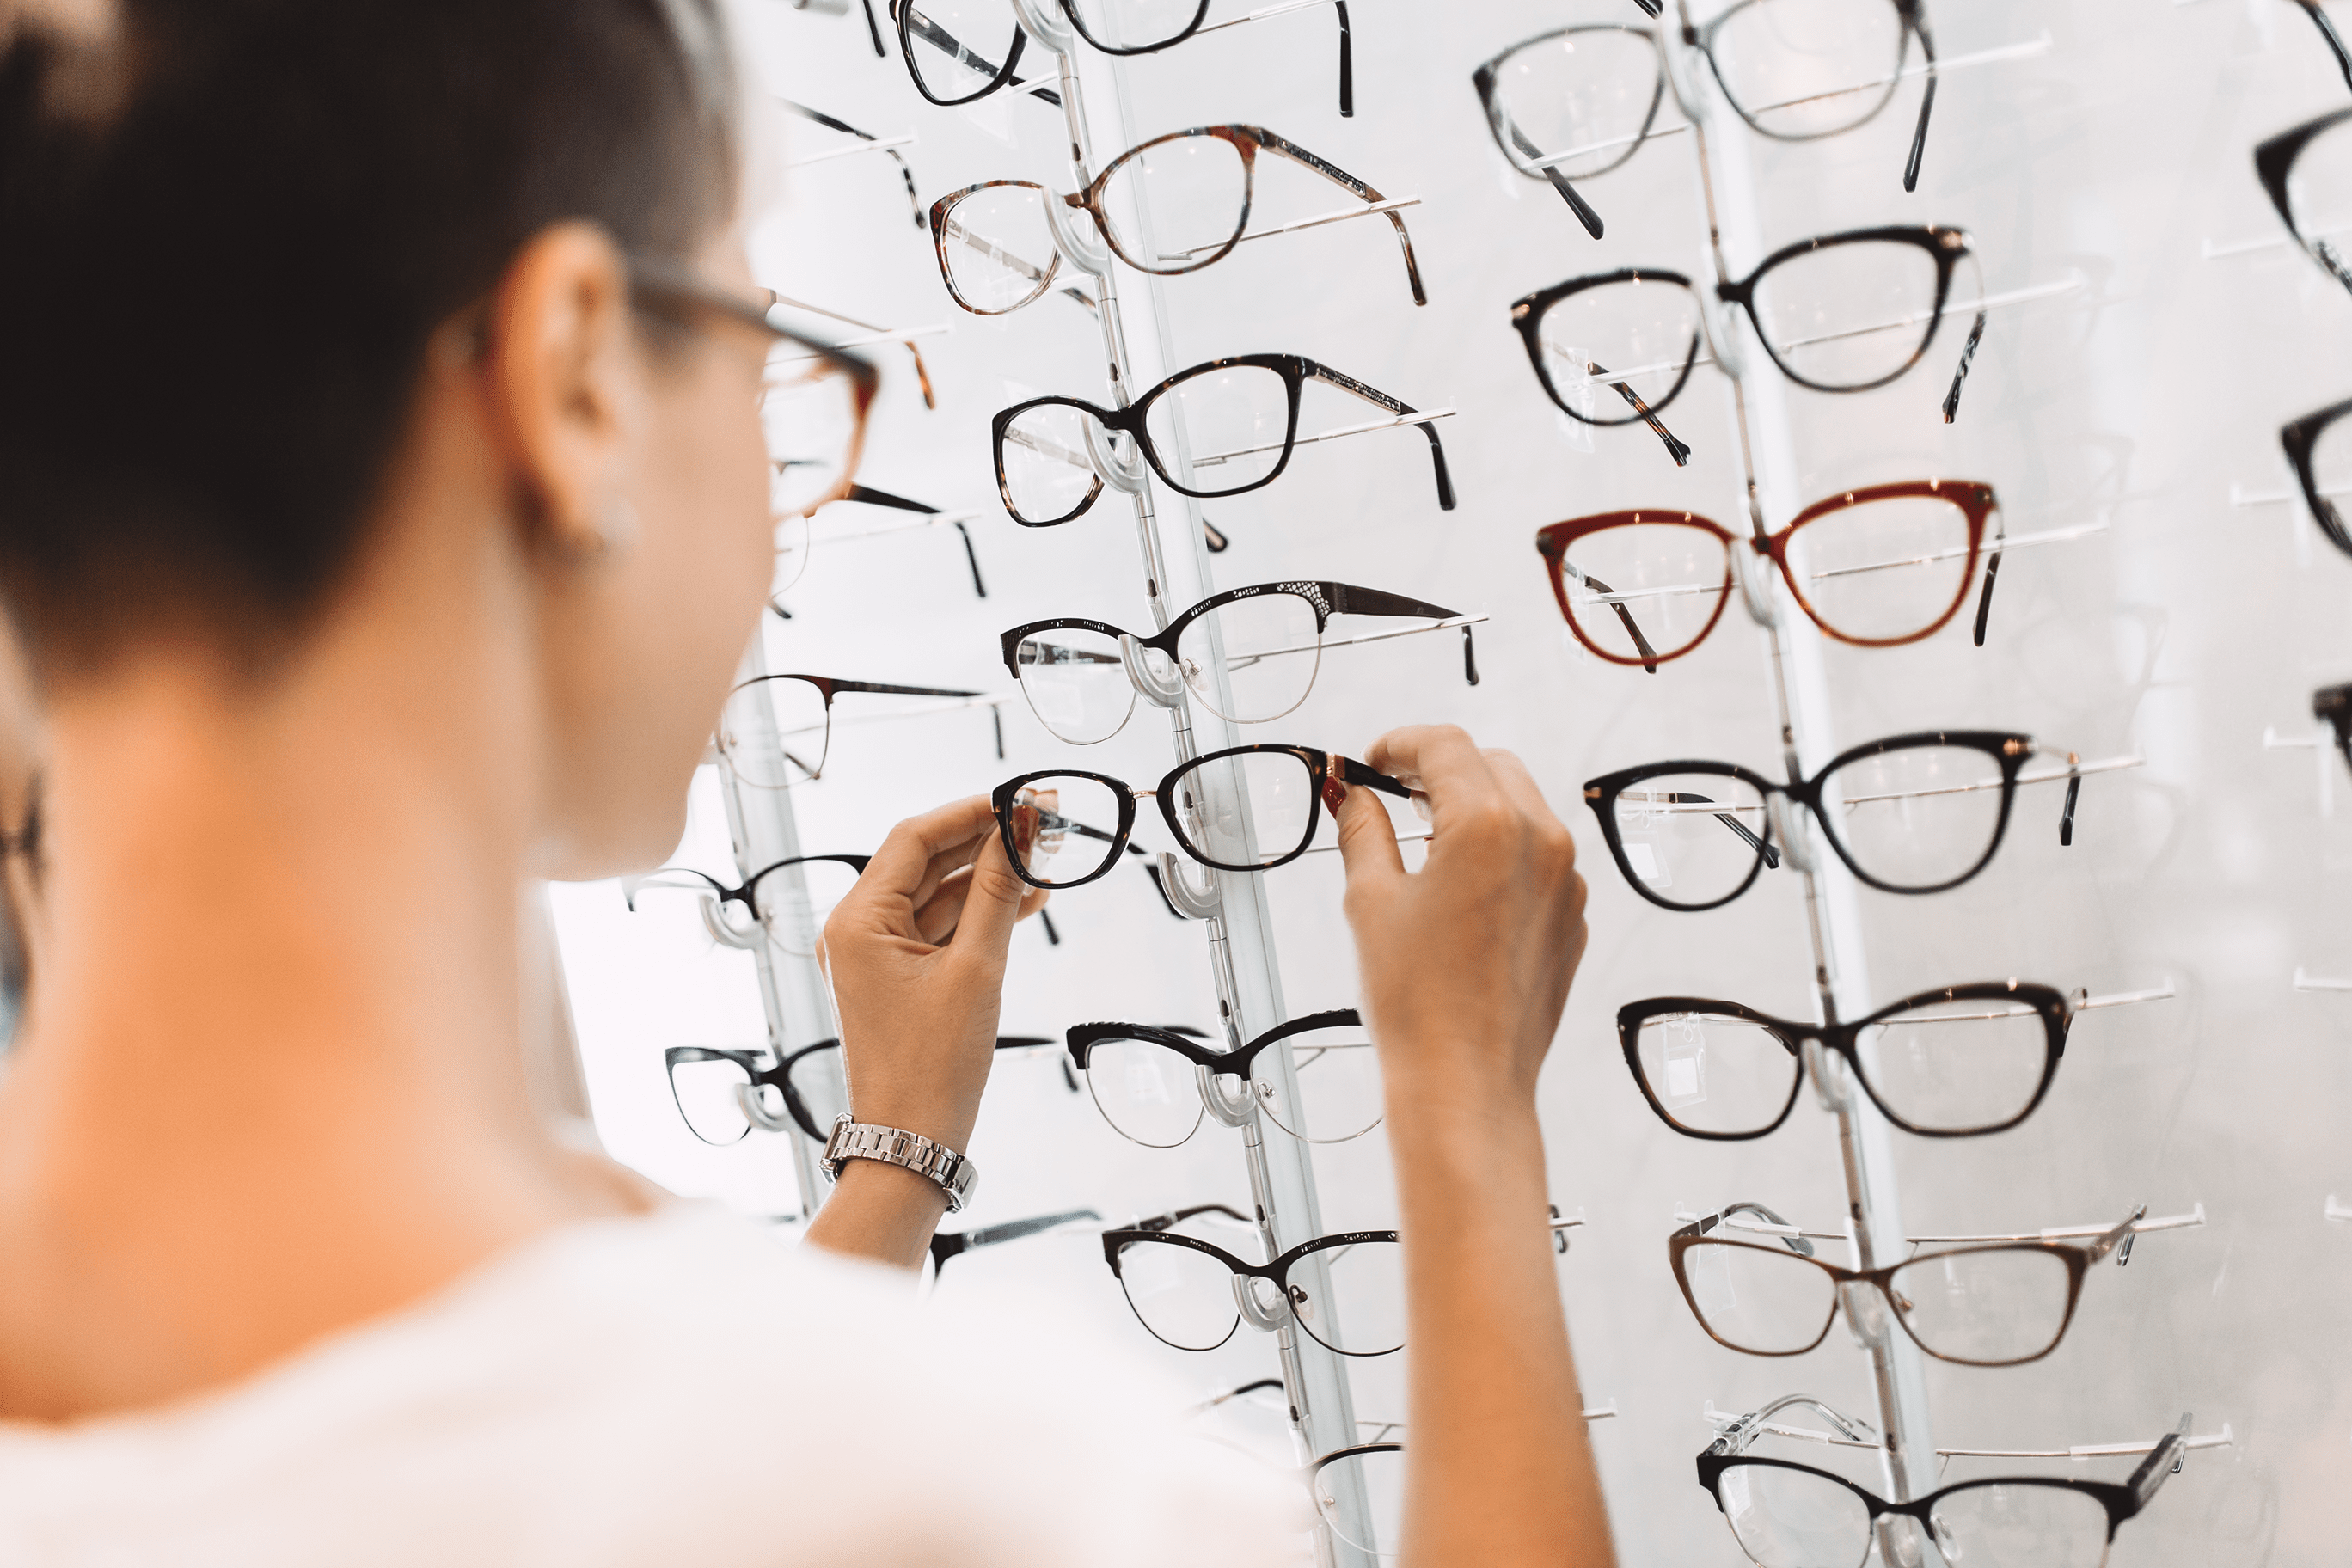 A woman choosing a pair of glasses in front of a mirro